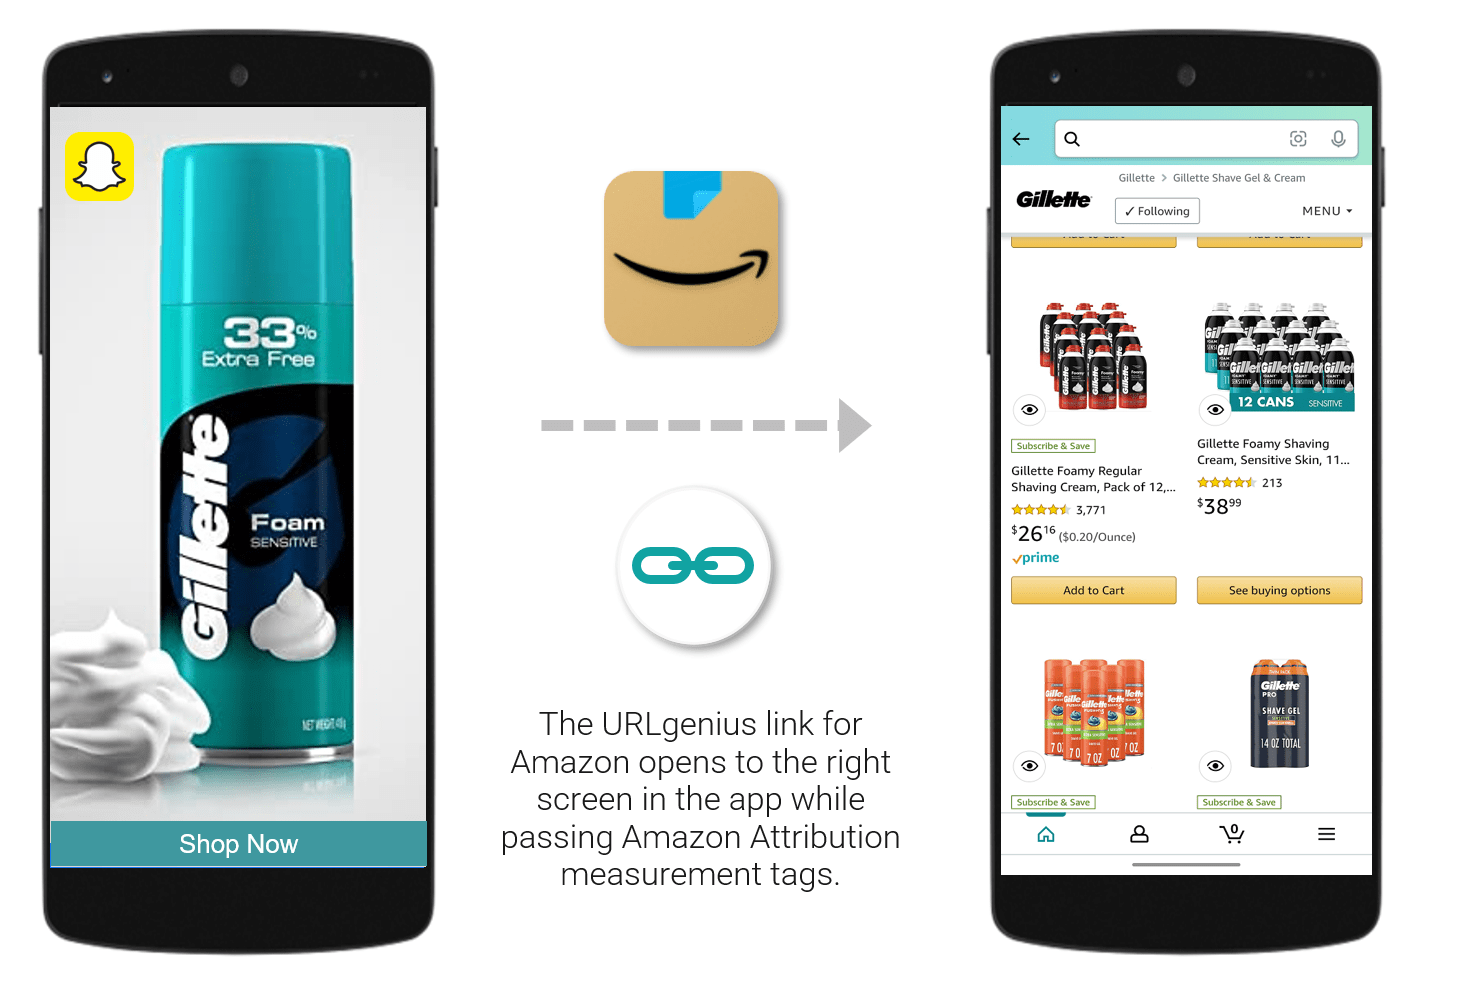 The URLgenius Amazon link for Gillette opens to the right screen in the app while passing Amazon Attribution measurement tags 